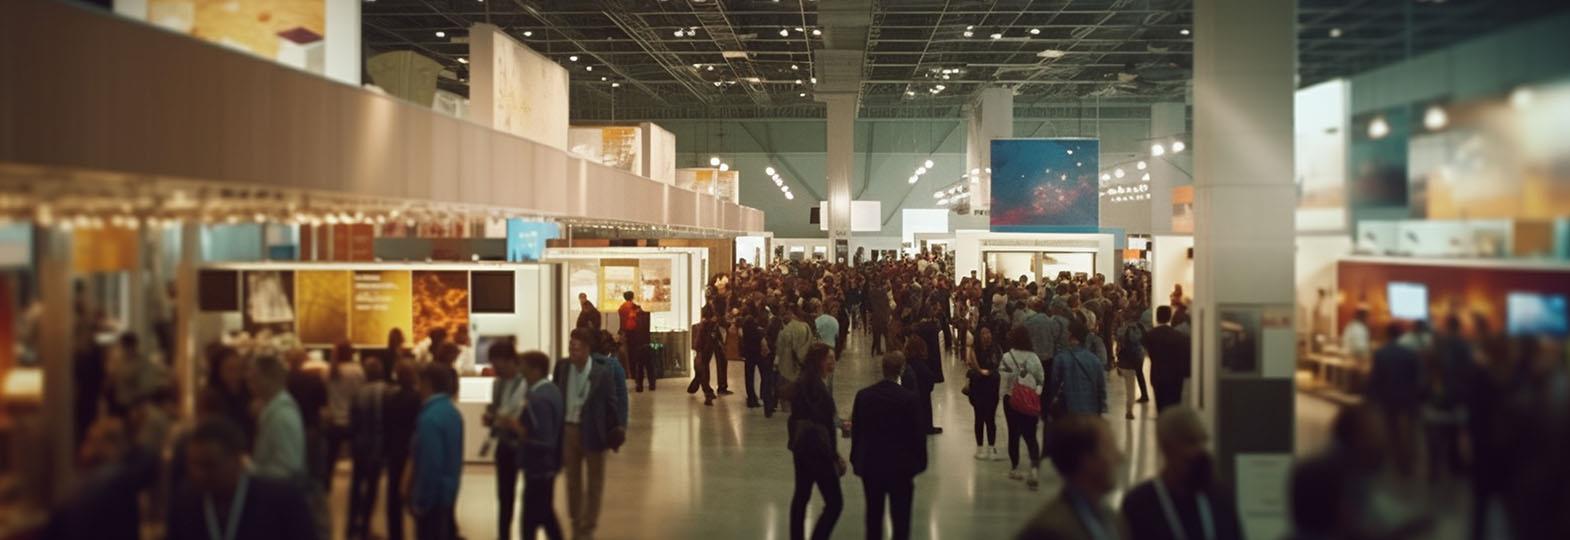 How You Can Stay Up to Date with Upcoming Fashion Trade Fairs